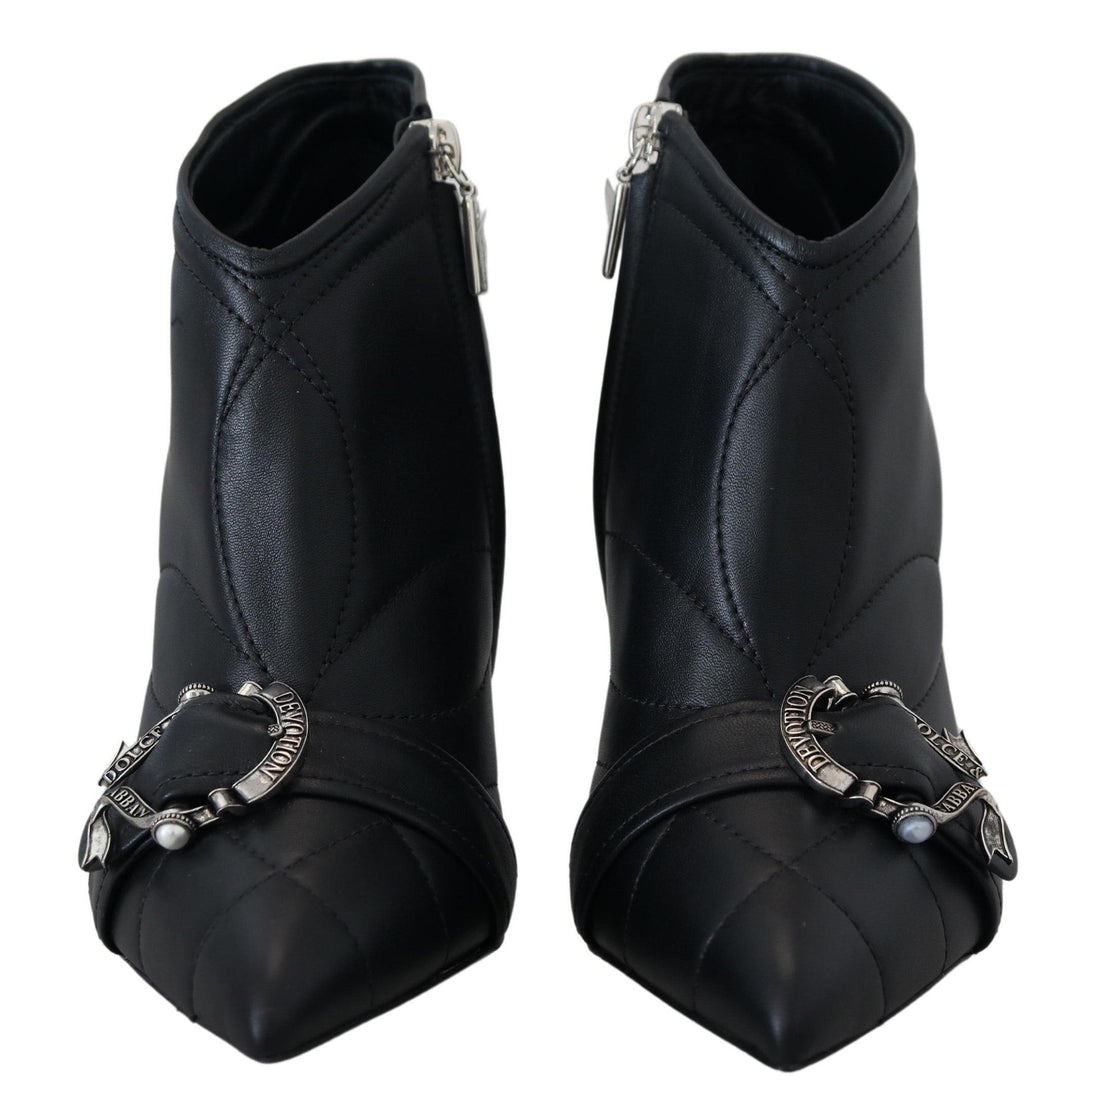 Dolce & Gabbana Black Devotion Quilted Buckled Ankle Boots Shoes